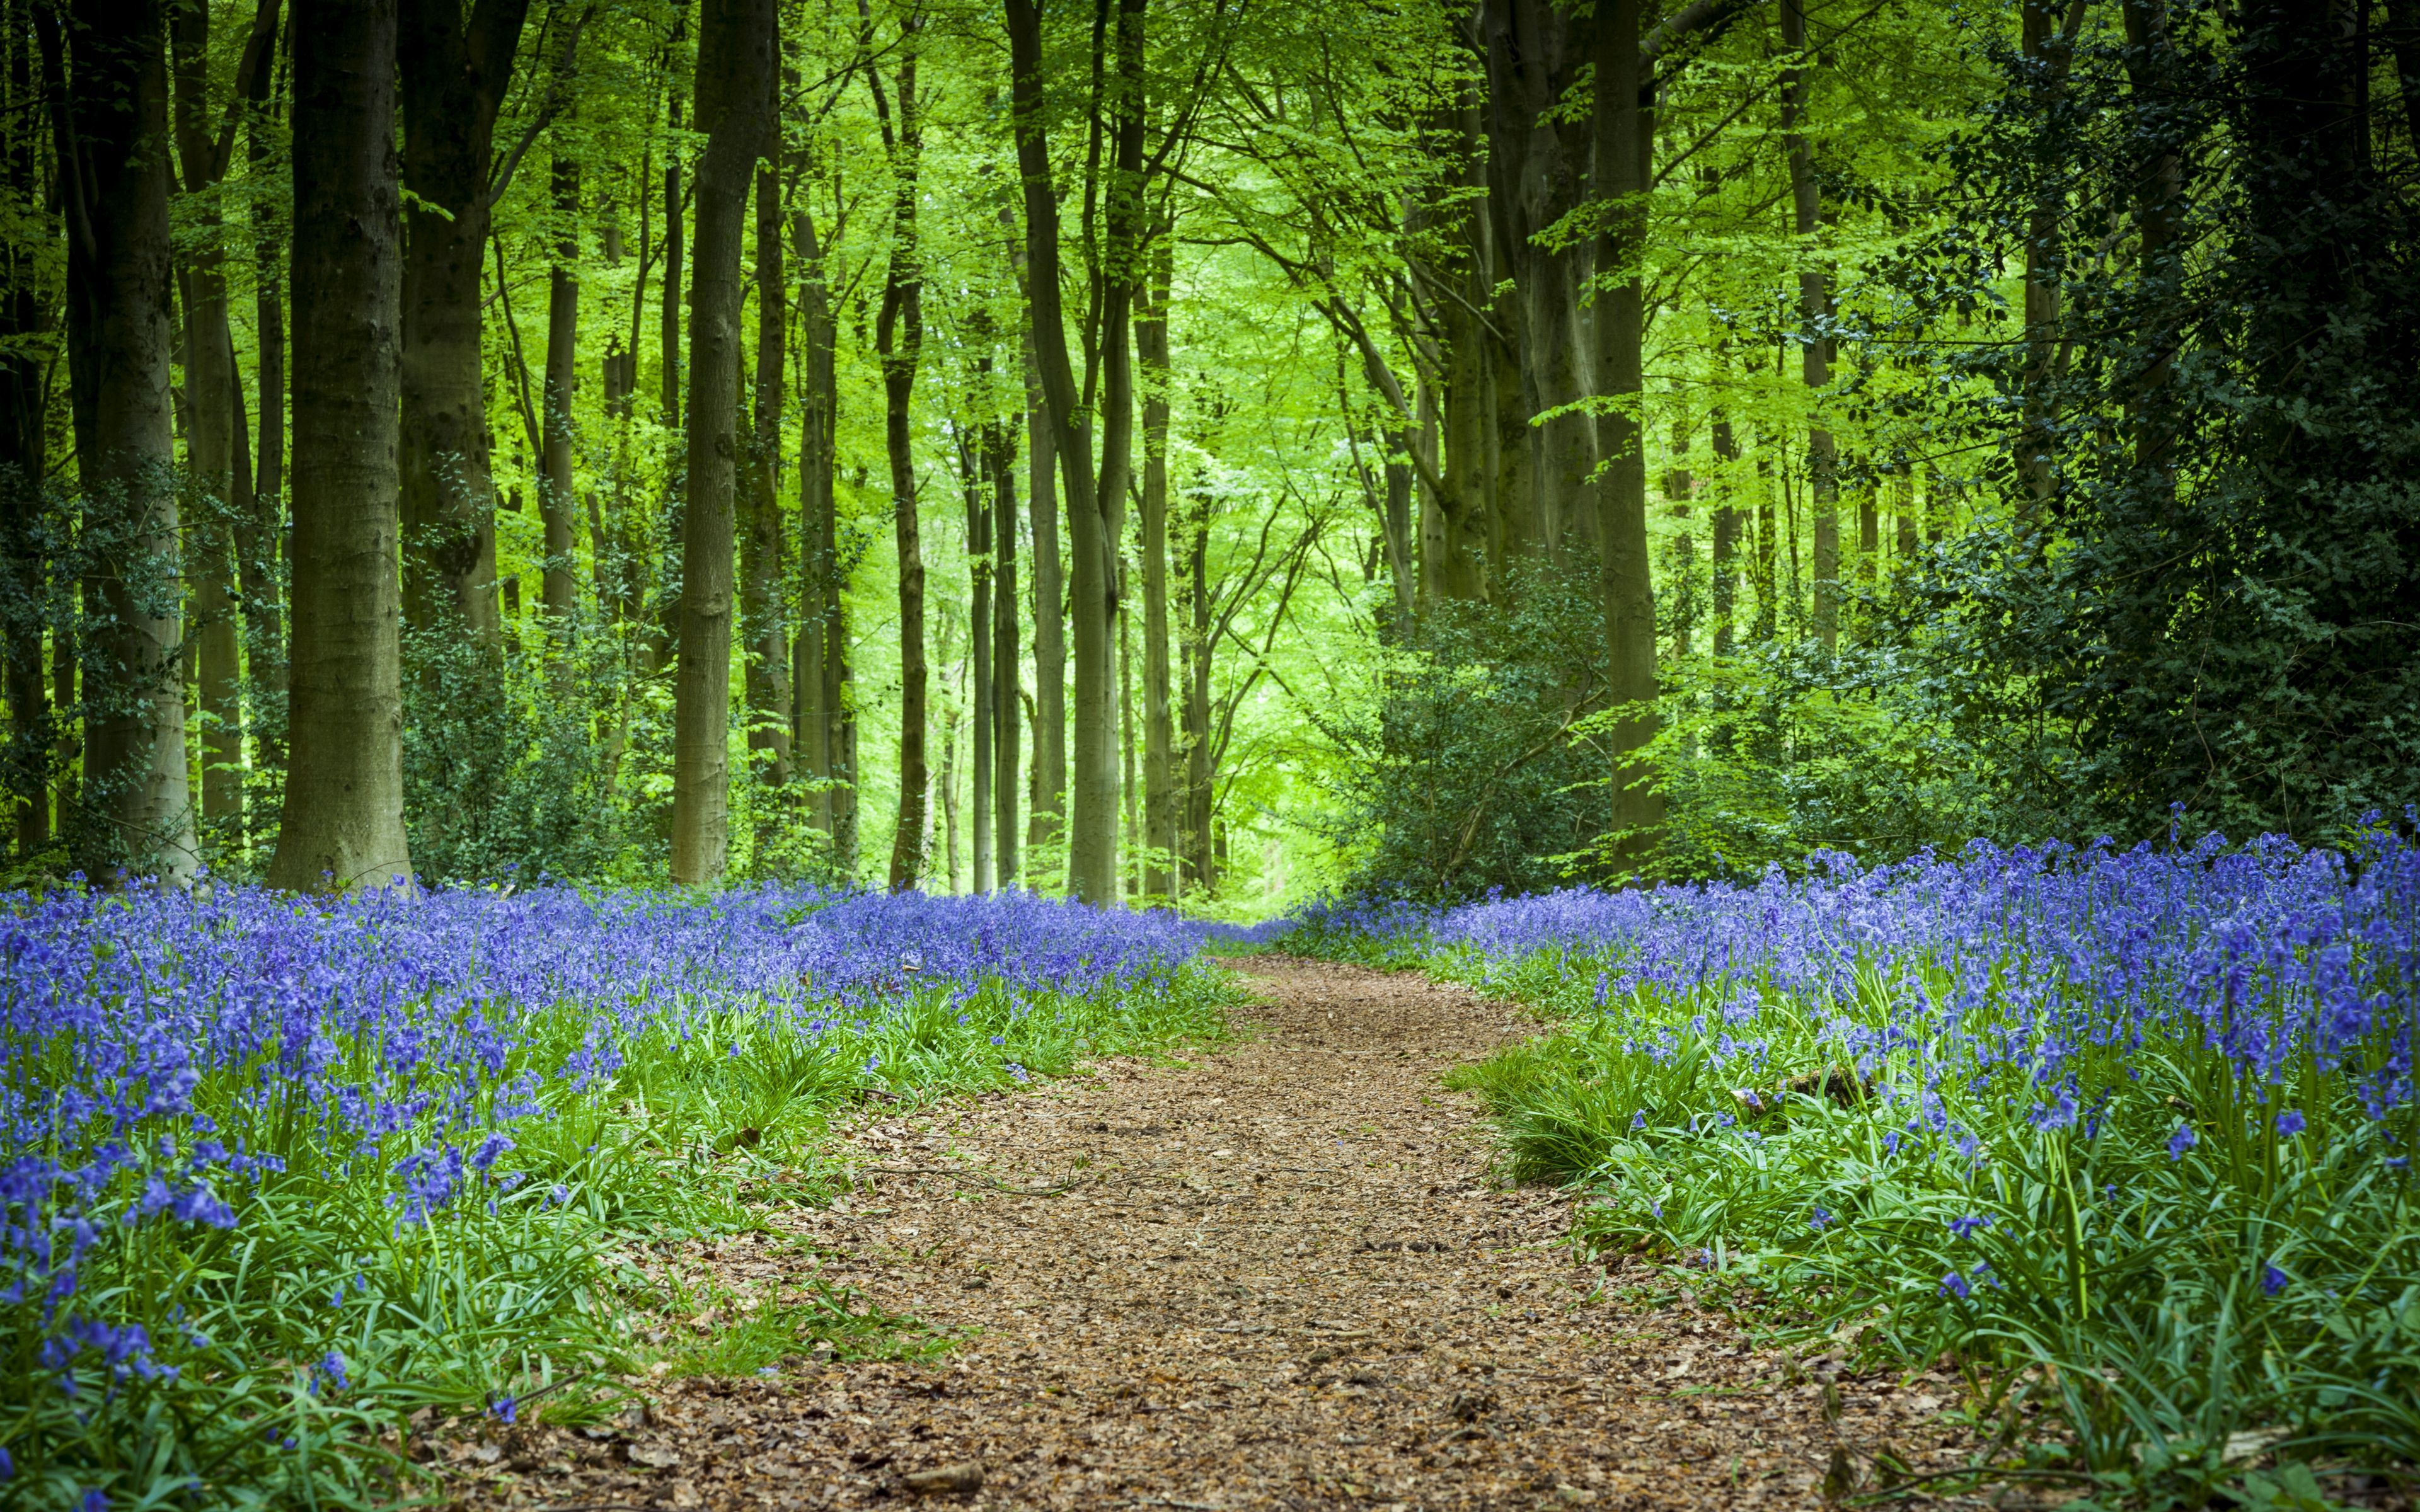 Download wallpaper 3840x2400 forest, path, flowers, spring 4k